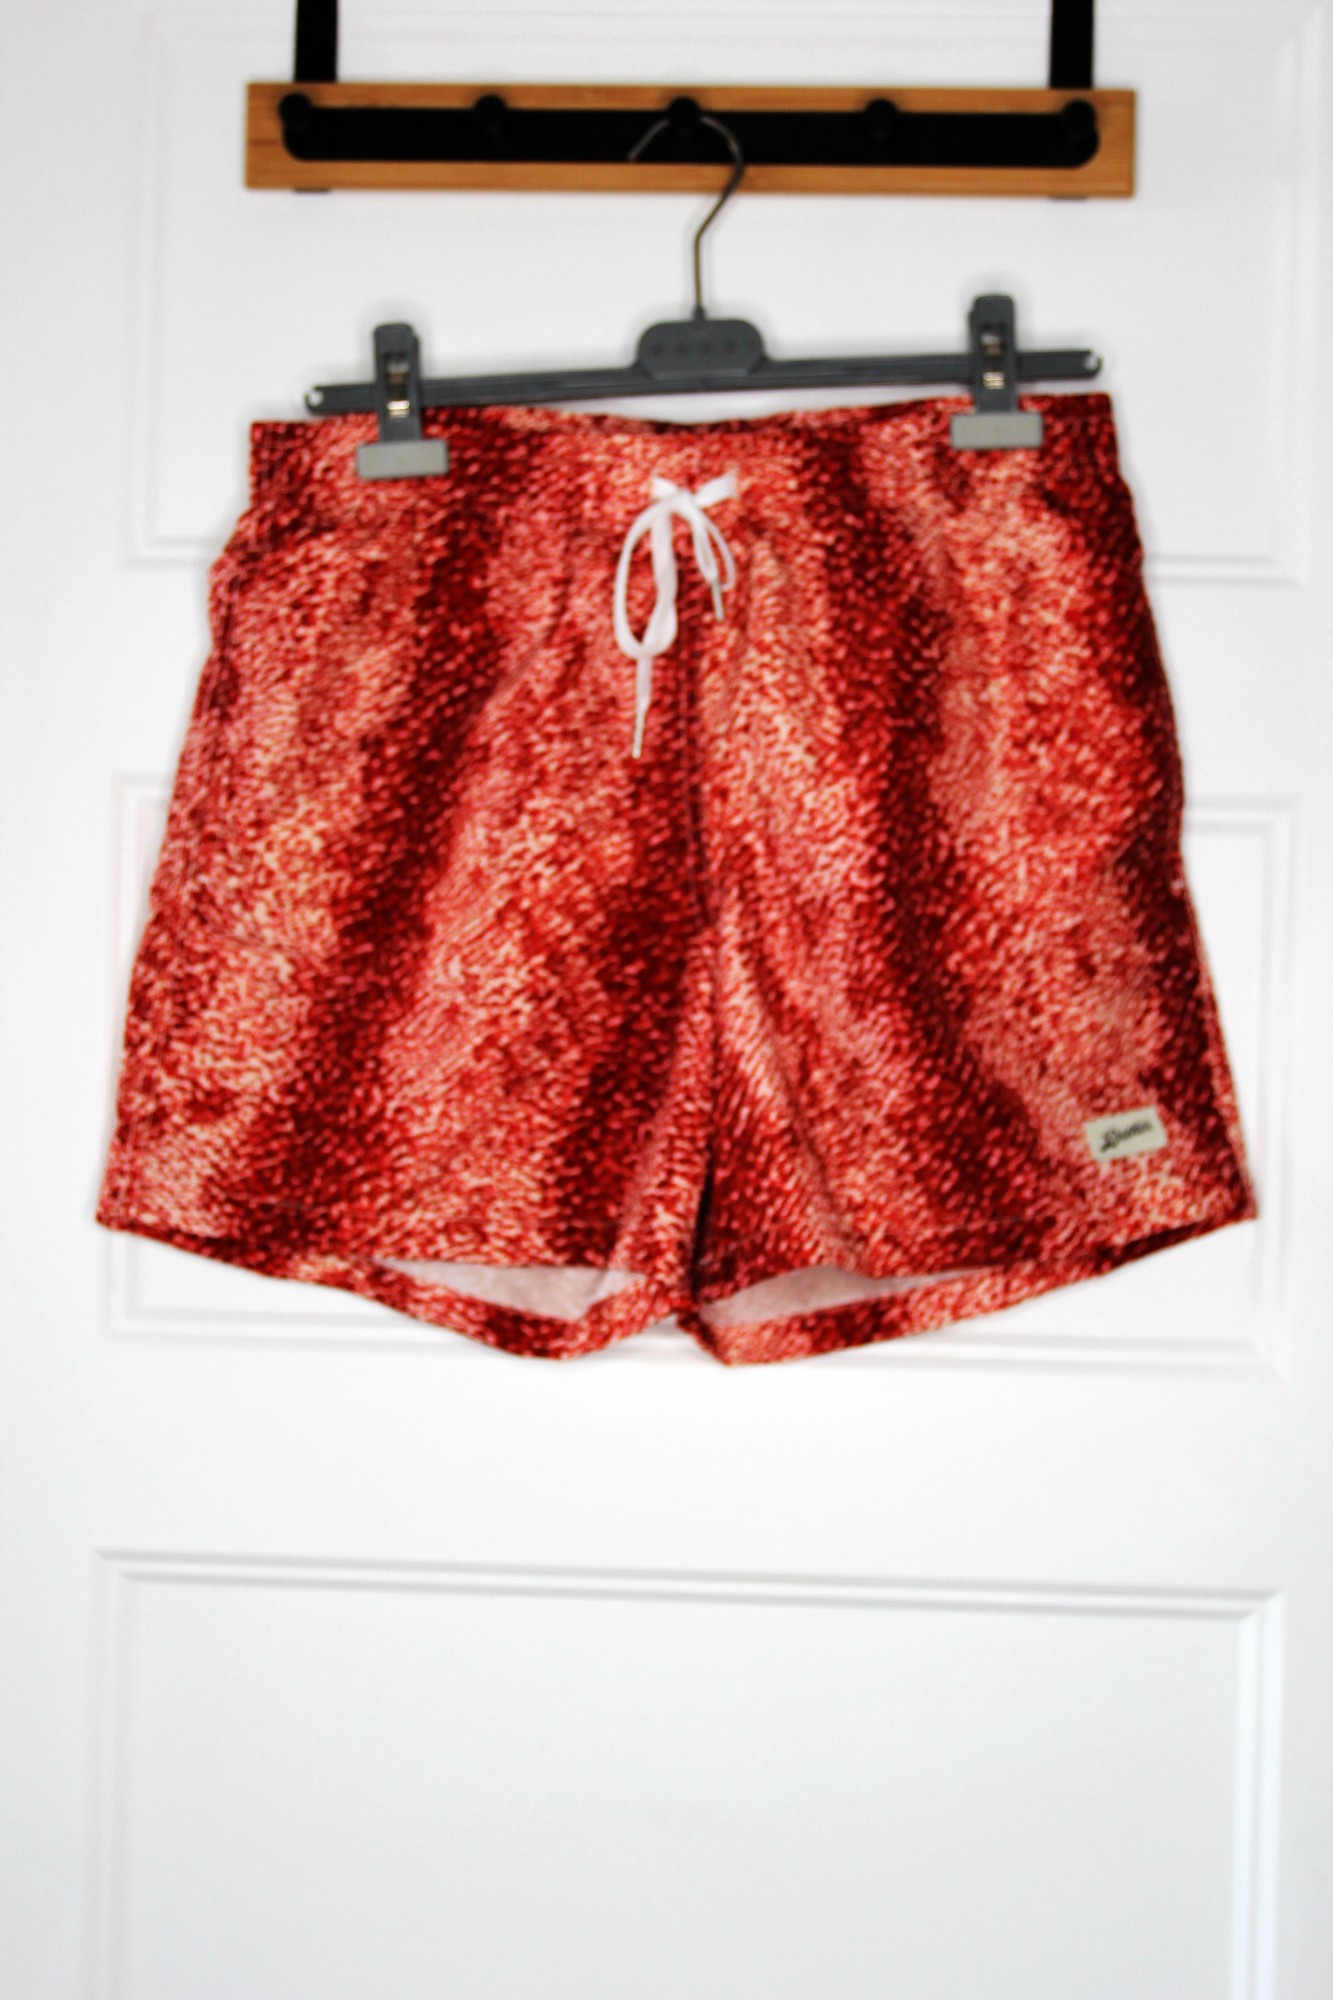 BNWT SS23 BATHER RED PAINTED MOSS SWIM SHORTS M - 2